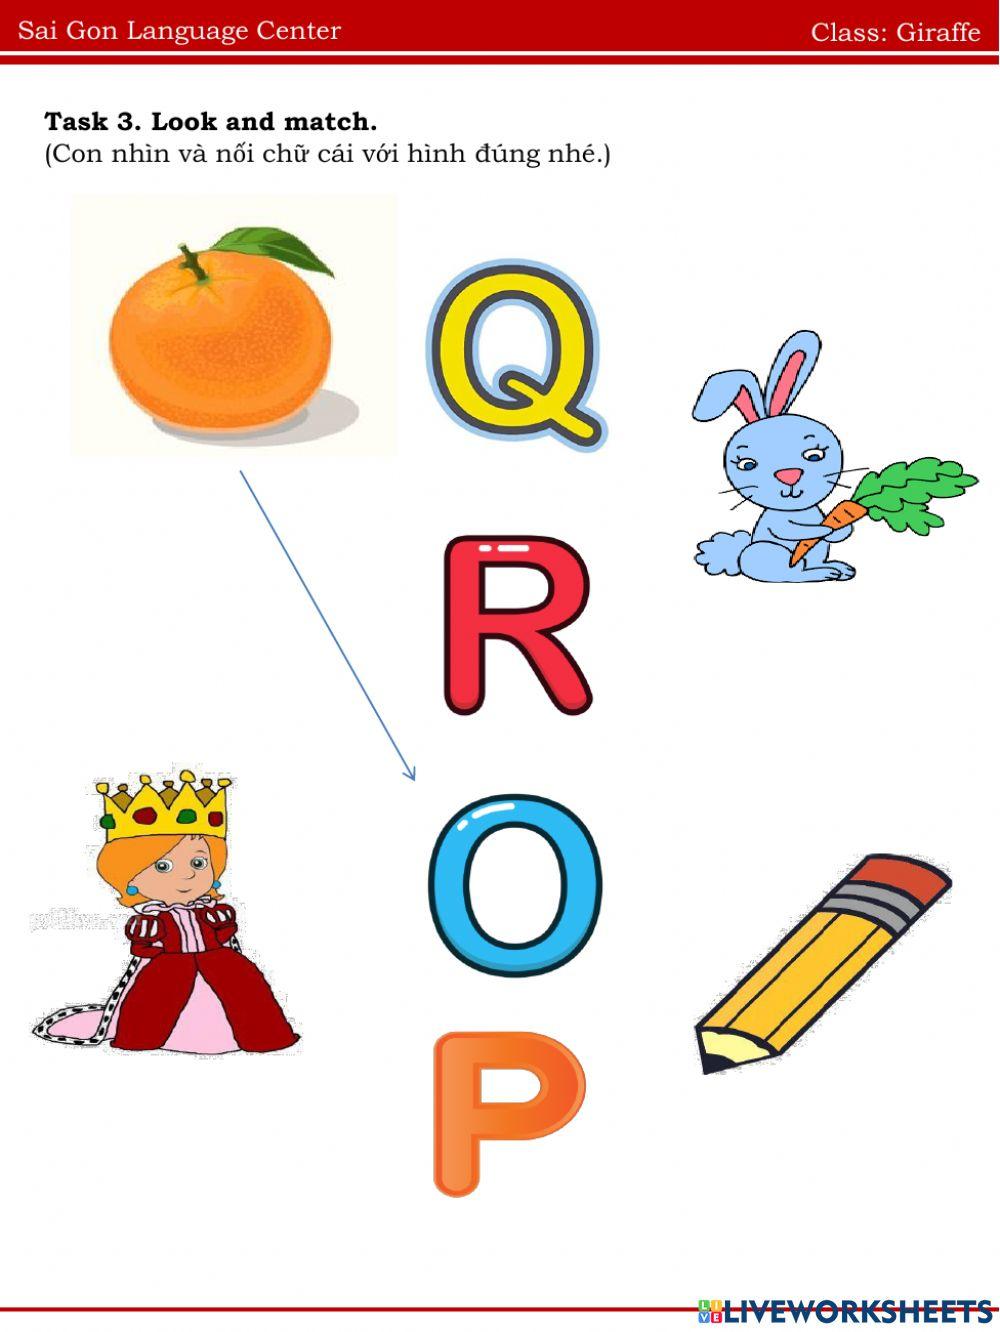 A3. Letters R, Q